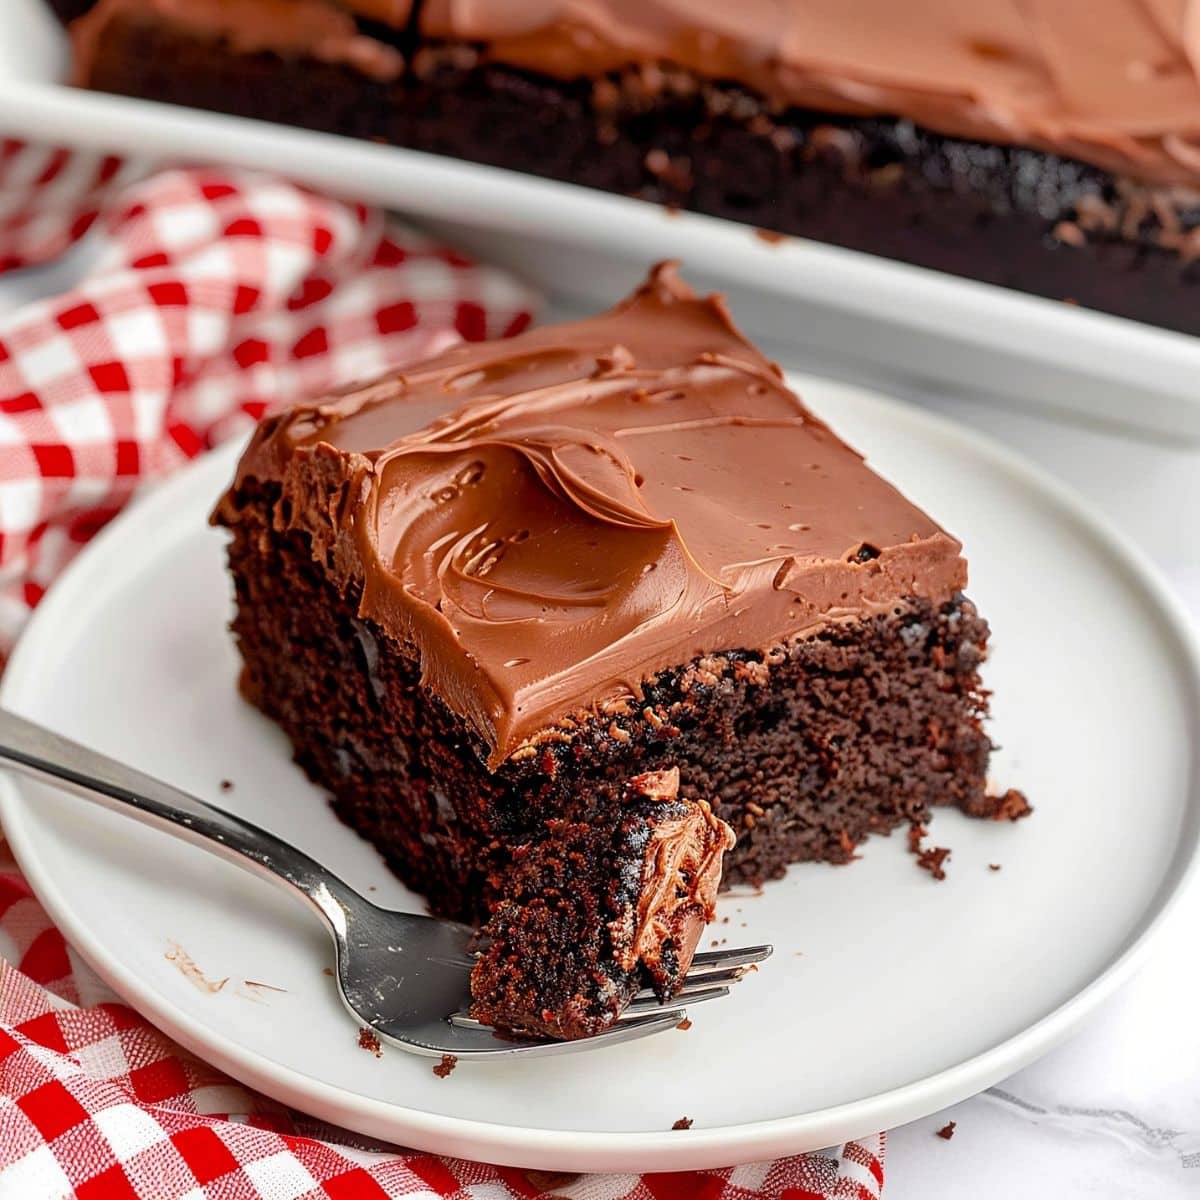 Slice of Chocolate Coca Cola Cake with Chocolate Frosting on a White Plate with a Fork, a Red Gingham Kitchen Towel, and the Rest of the Cake in the Tray Behind It